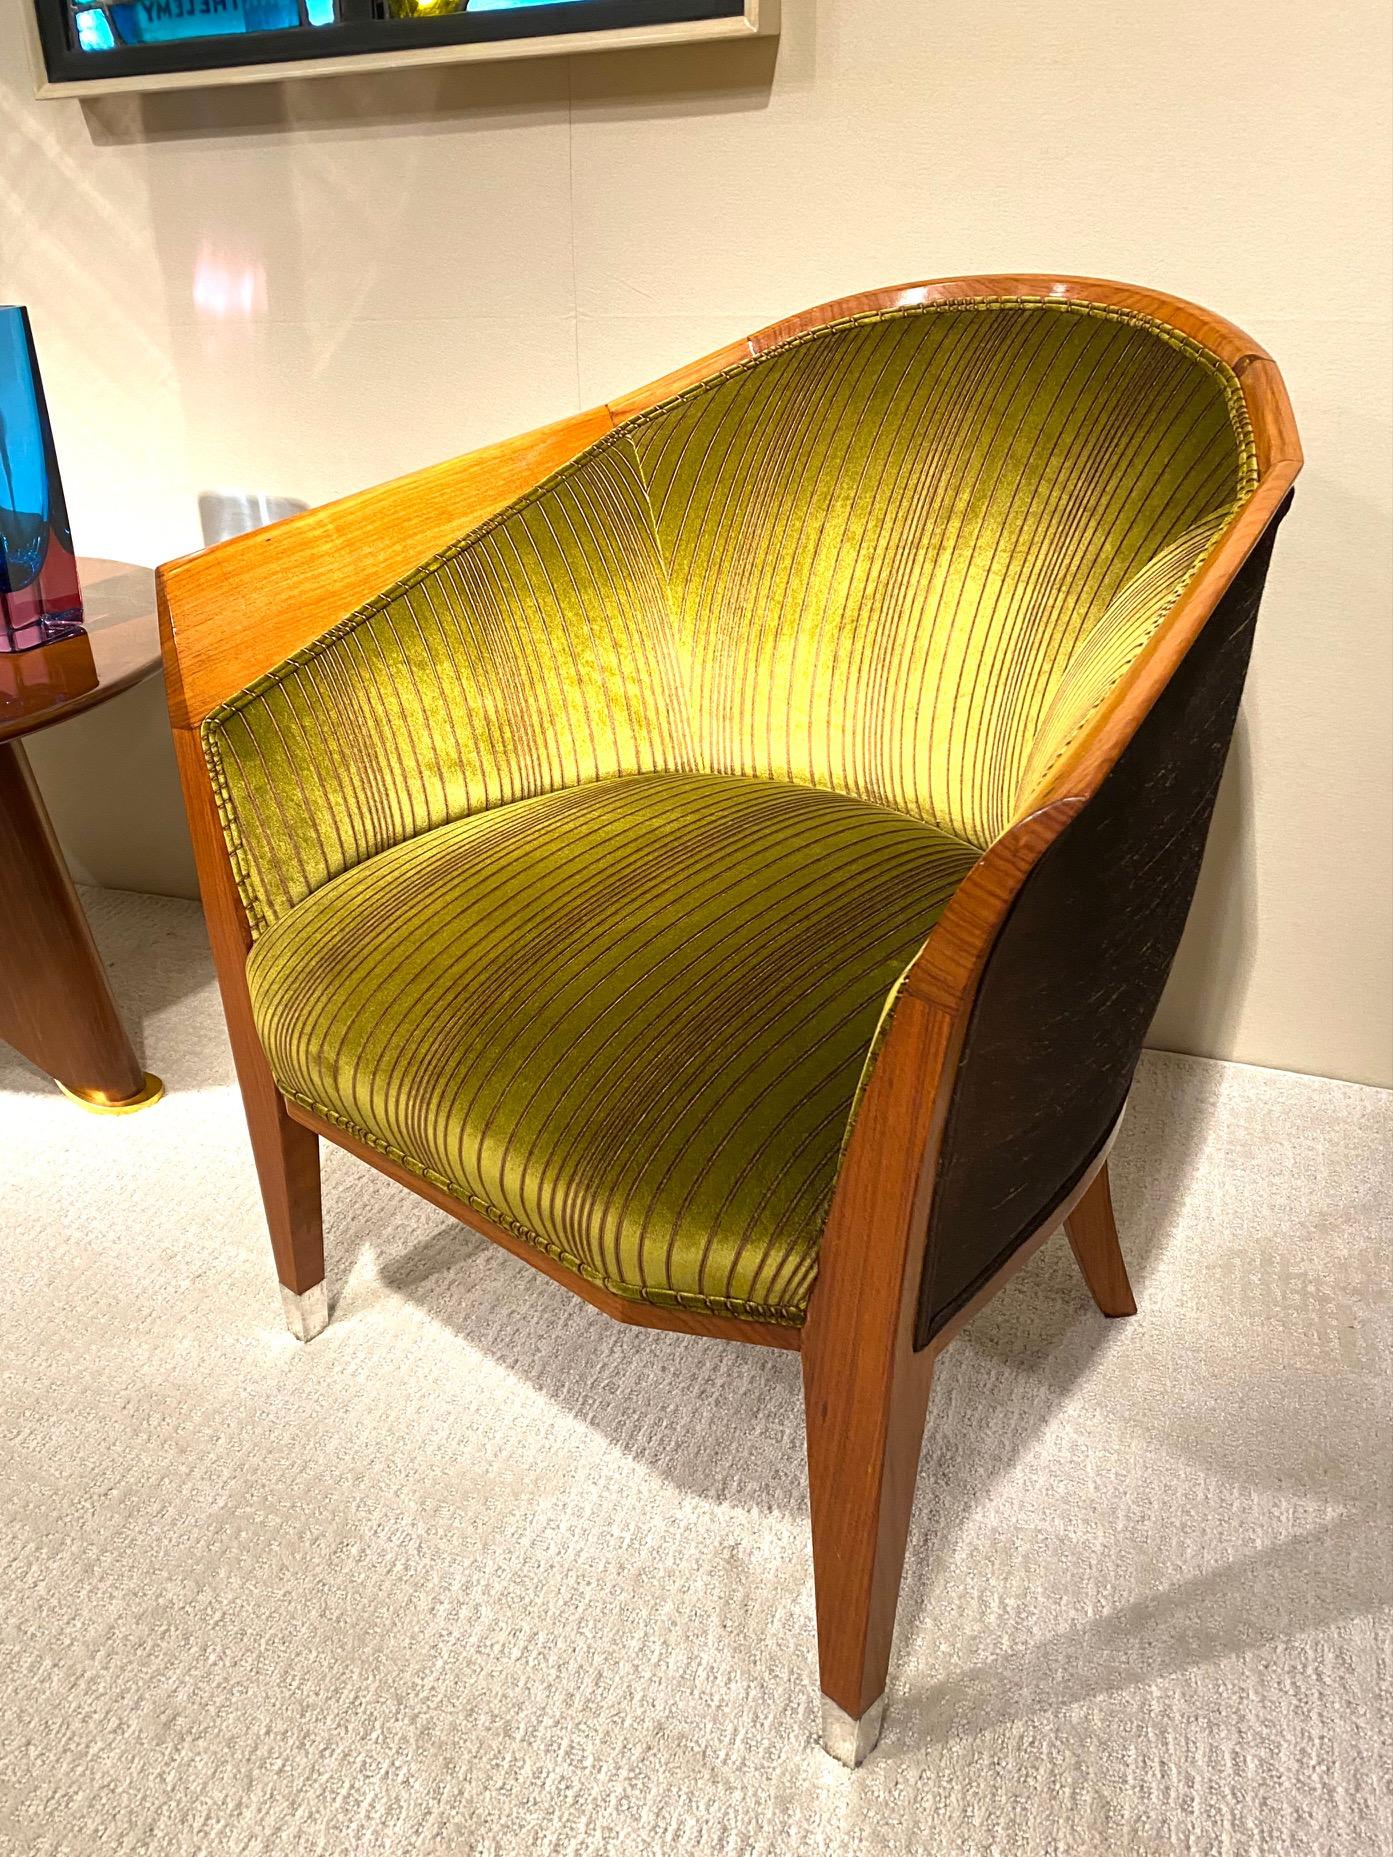 Rare French Art Deco period Rosewood armchair , fitted with silvered brass hoofs , upholstered with green velvet fabric. Maison Dominique , Andre Domin & Marcel Genevrière , Paris France: circa 1925. Reference Art Deco les maîtres du mobilier le